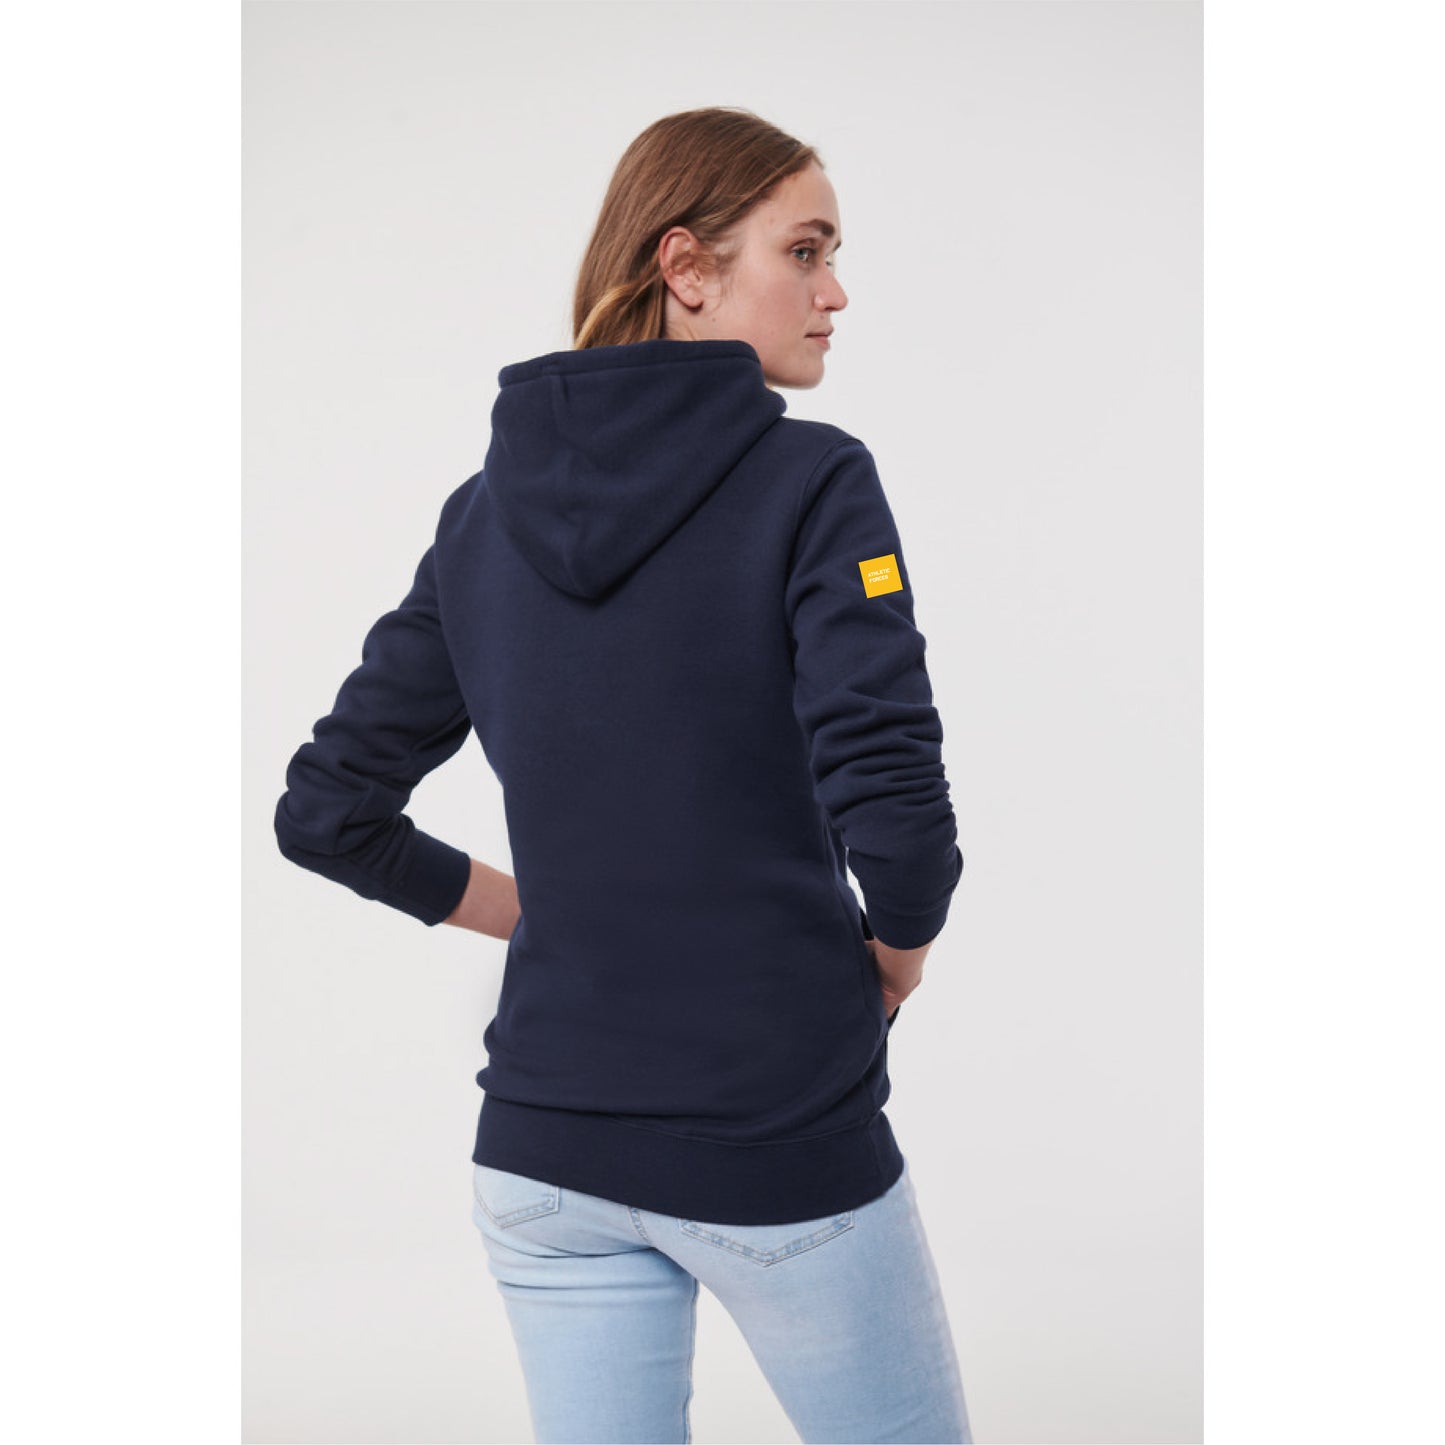 Sky Force Ascend Identity Hoodie